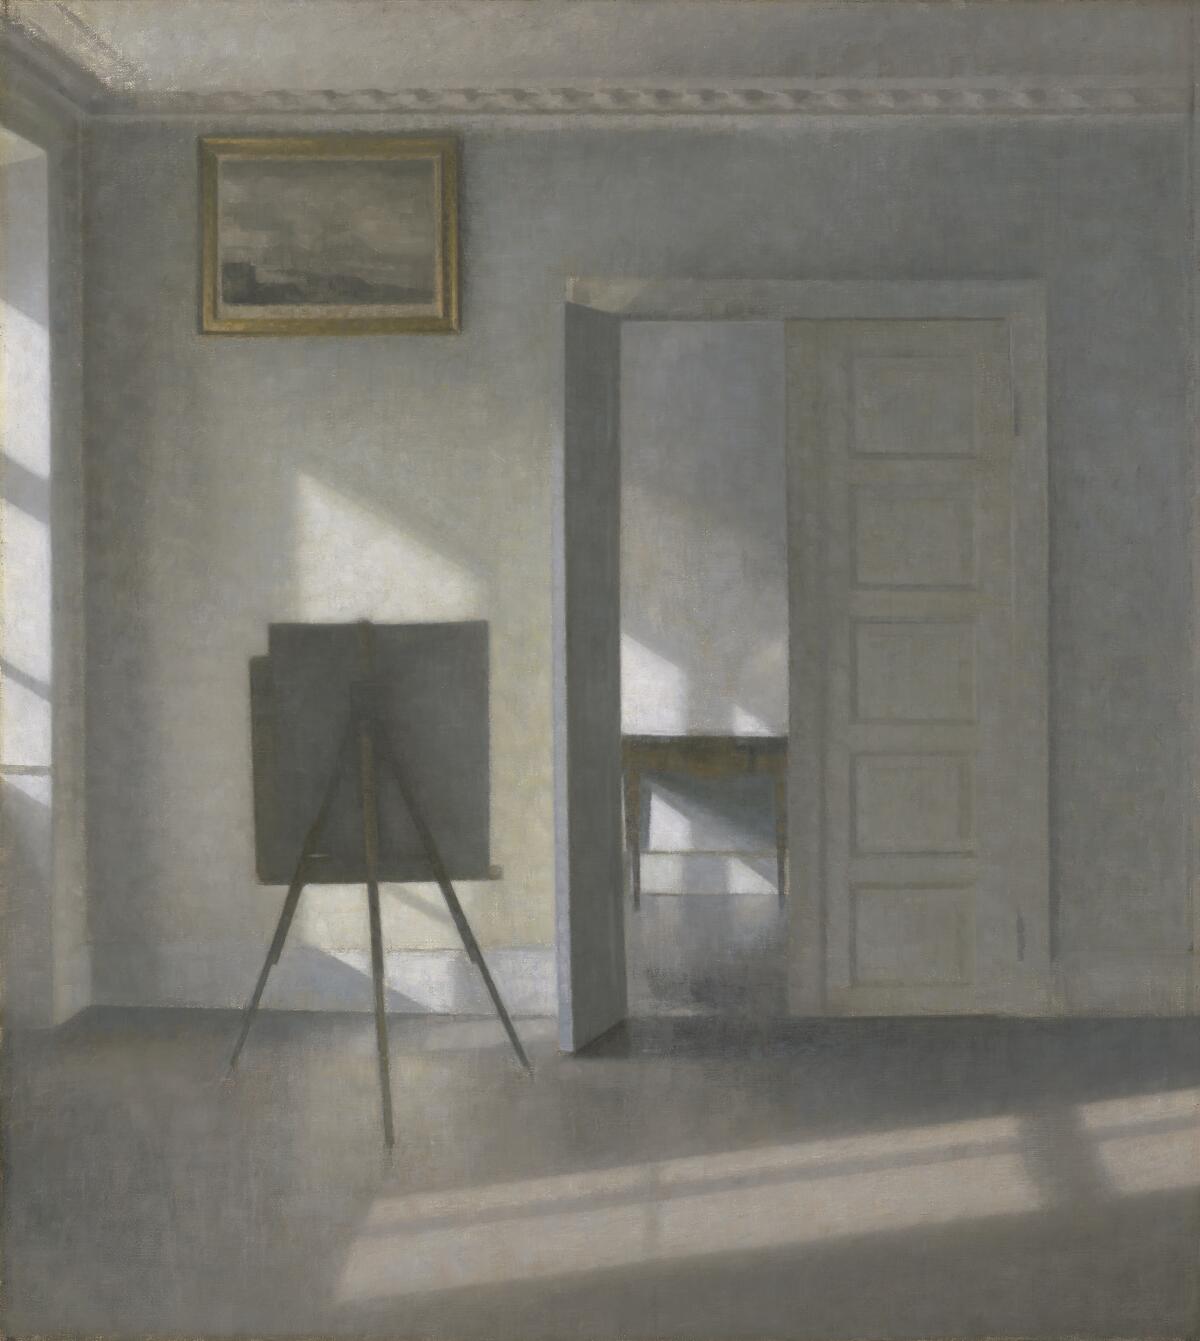 A painting in muted tones shows beams of light penetrating a room with a canvas on an easel and on a wall.